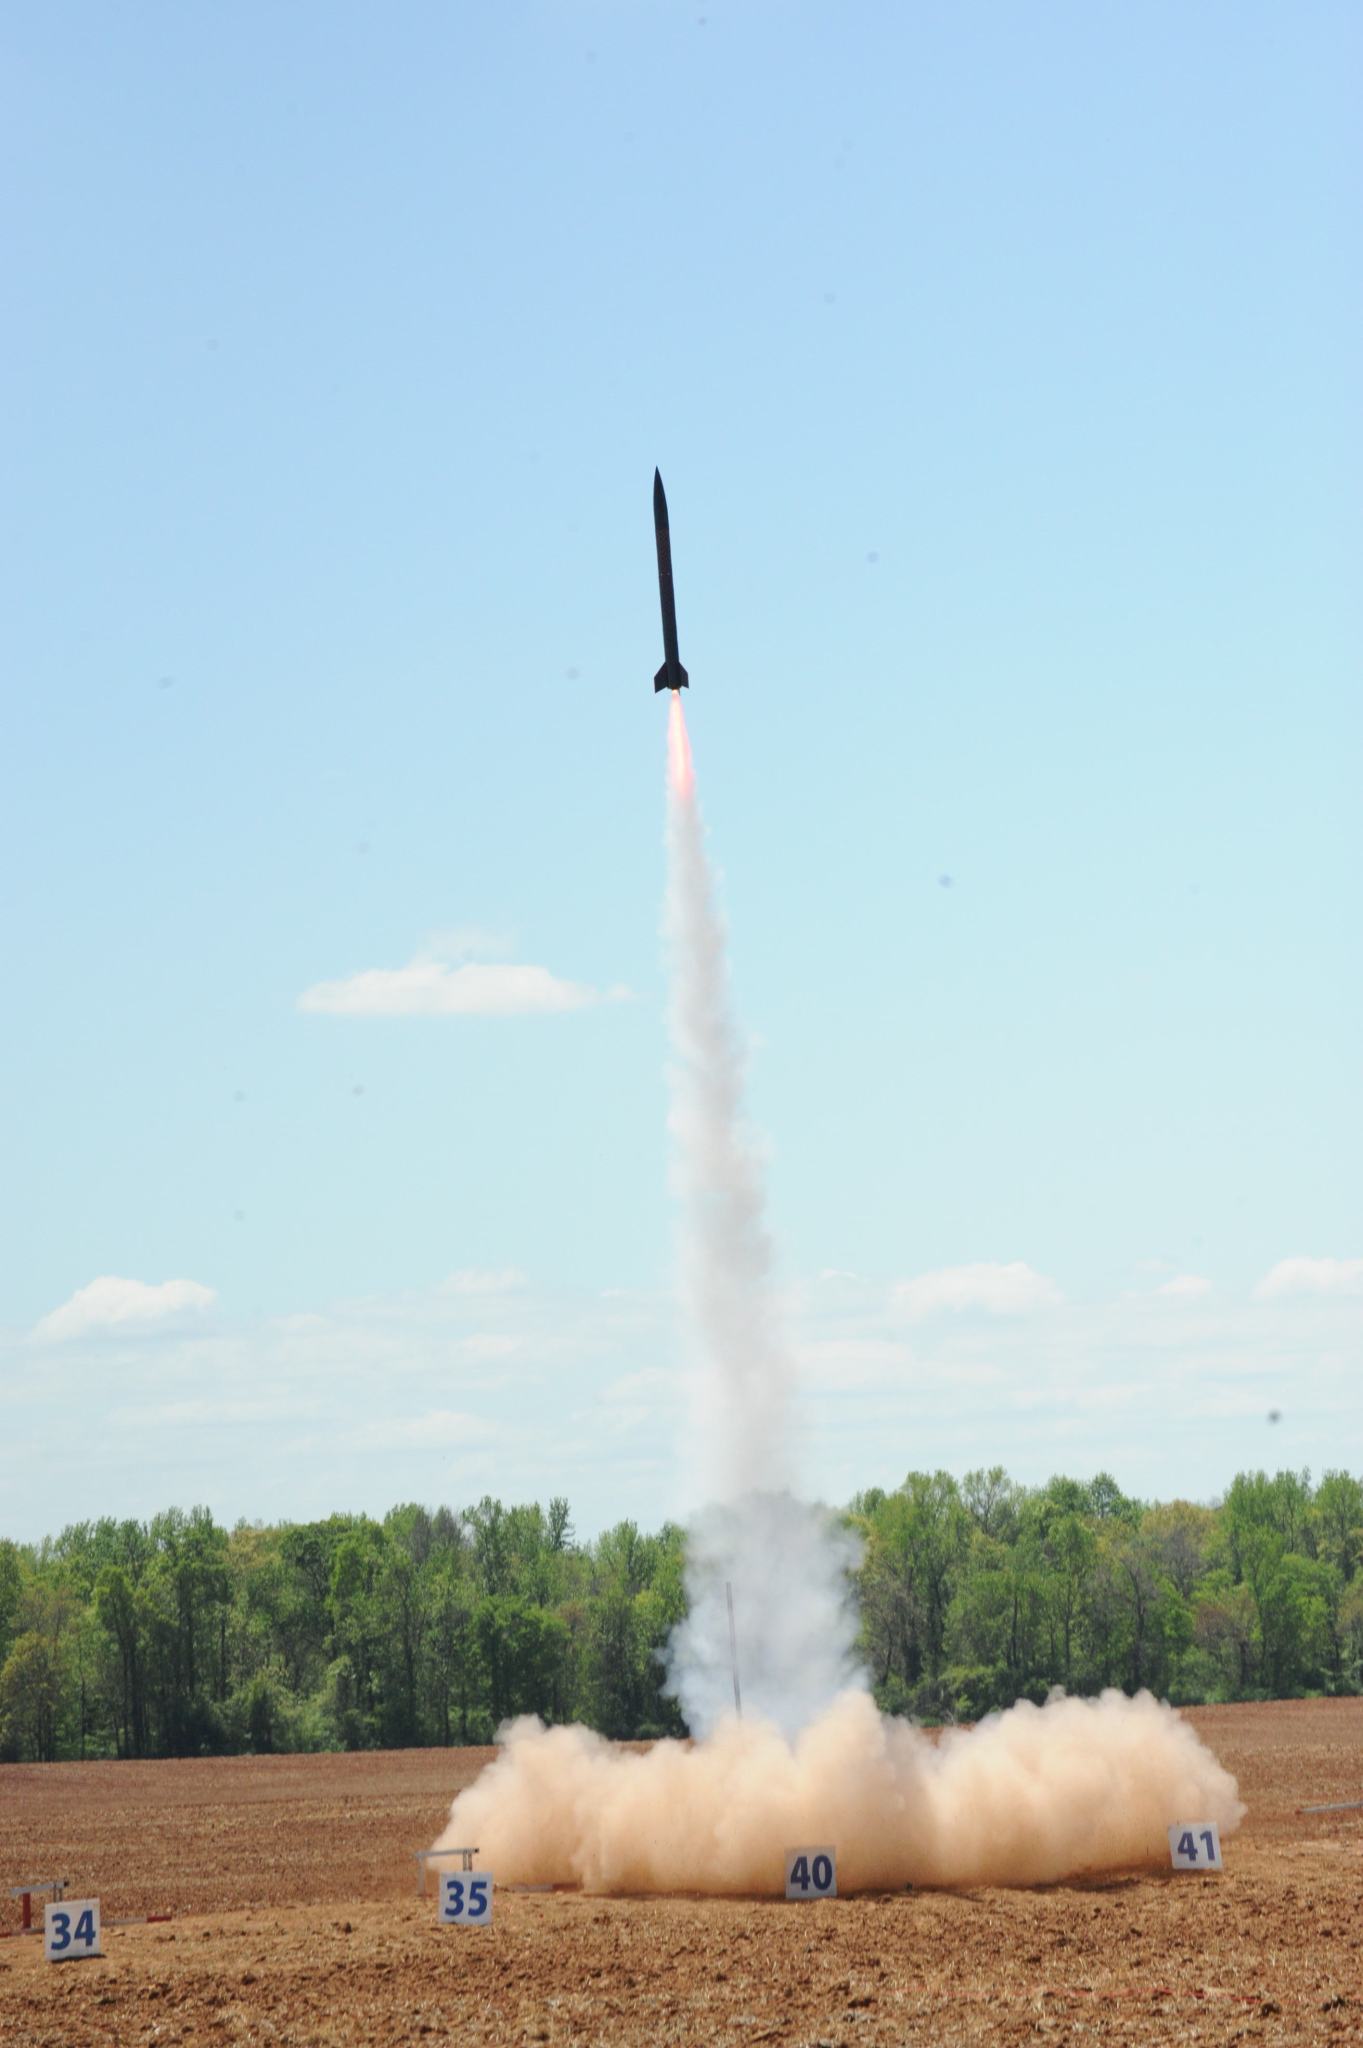 The 2016 Rookie of the Year team from the University of Cincinnati, launches its rocket during the Student Launch challenge.